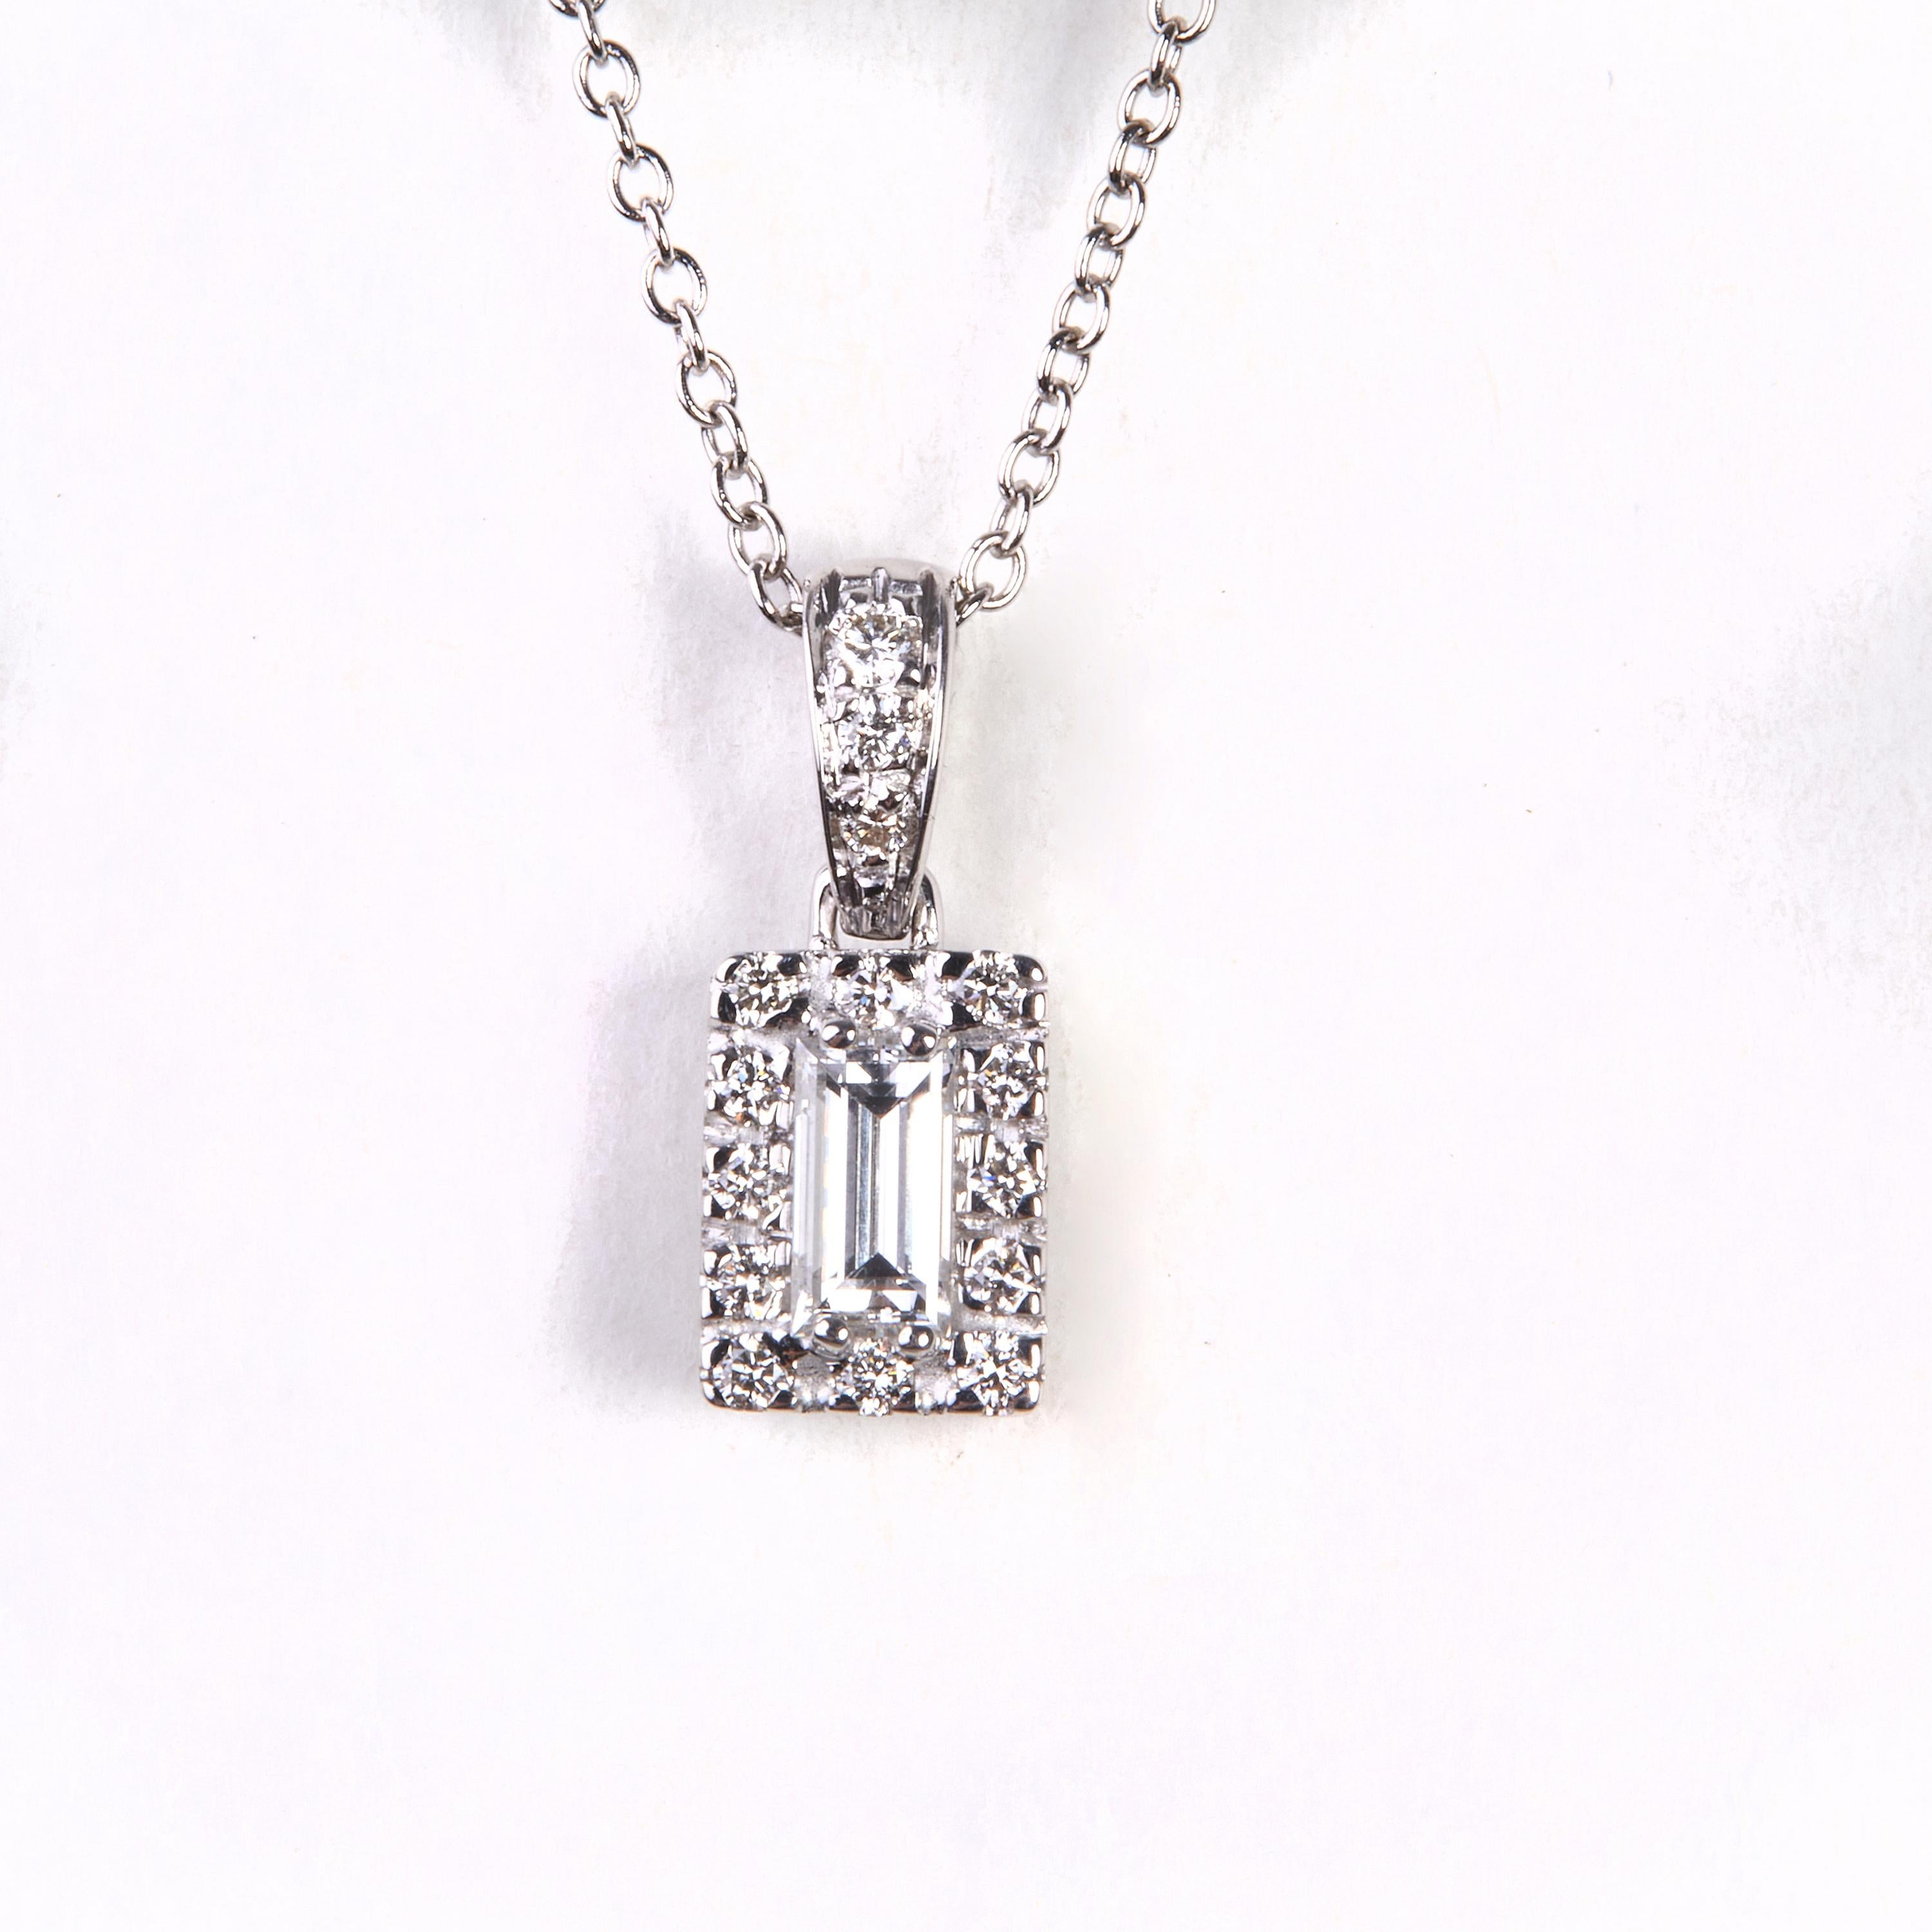 18 Karat White Gold Diamond  Pendant Necklace
17 Diamonds 0.18 Carat
1 Diamond Bag. 0.39 Carat





Founded in 1974, Gianni Lazzaro is a family-owned jewelery company based out of Düsseldorf, Germany.
Although rooted in Germany, Gianni Lazzaro's